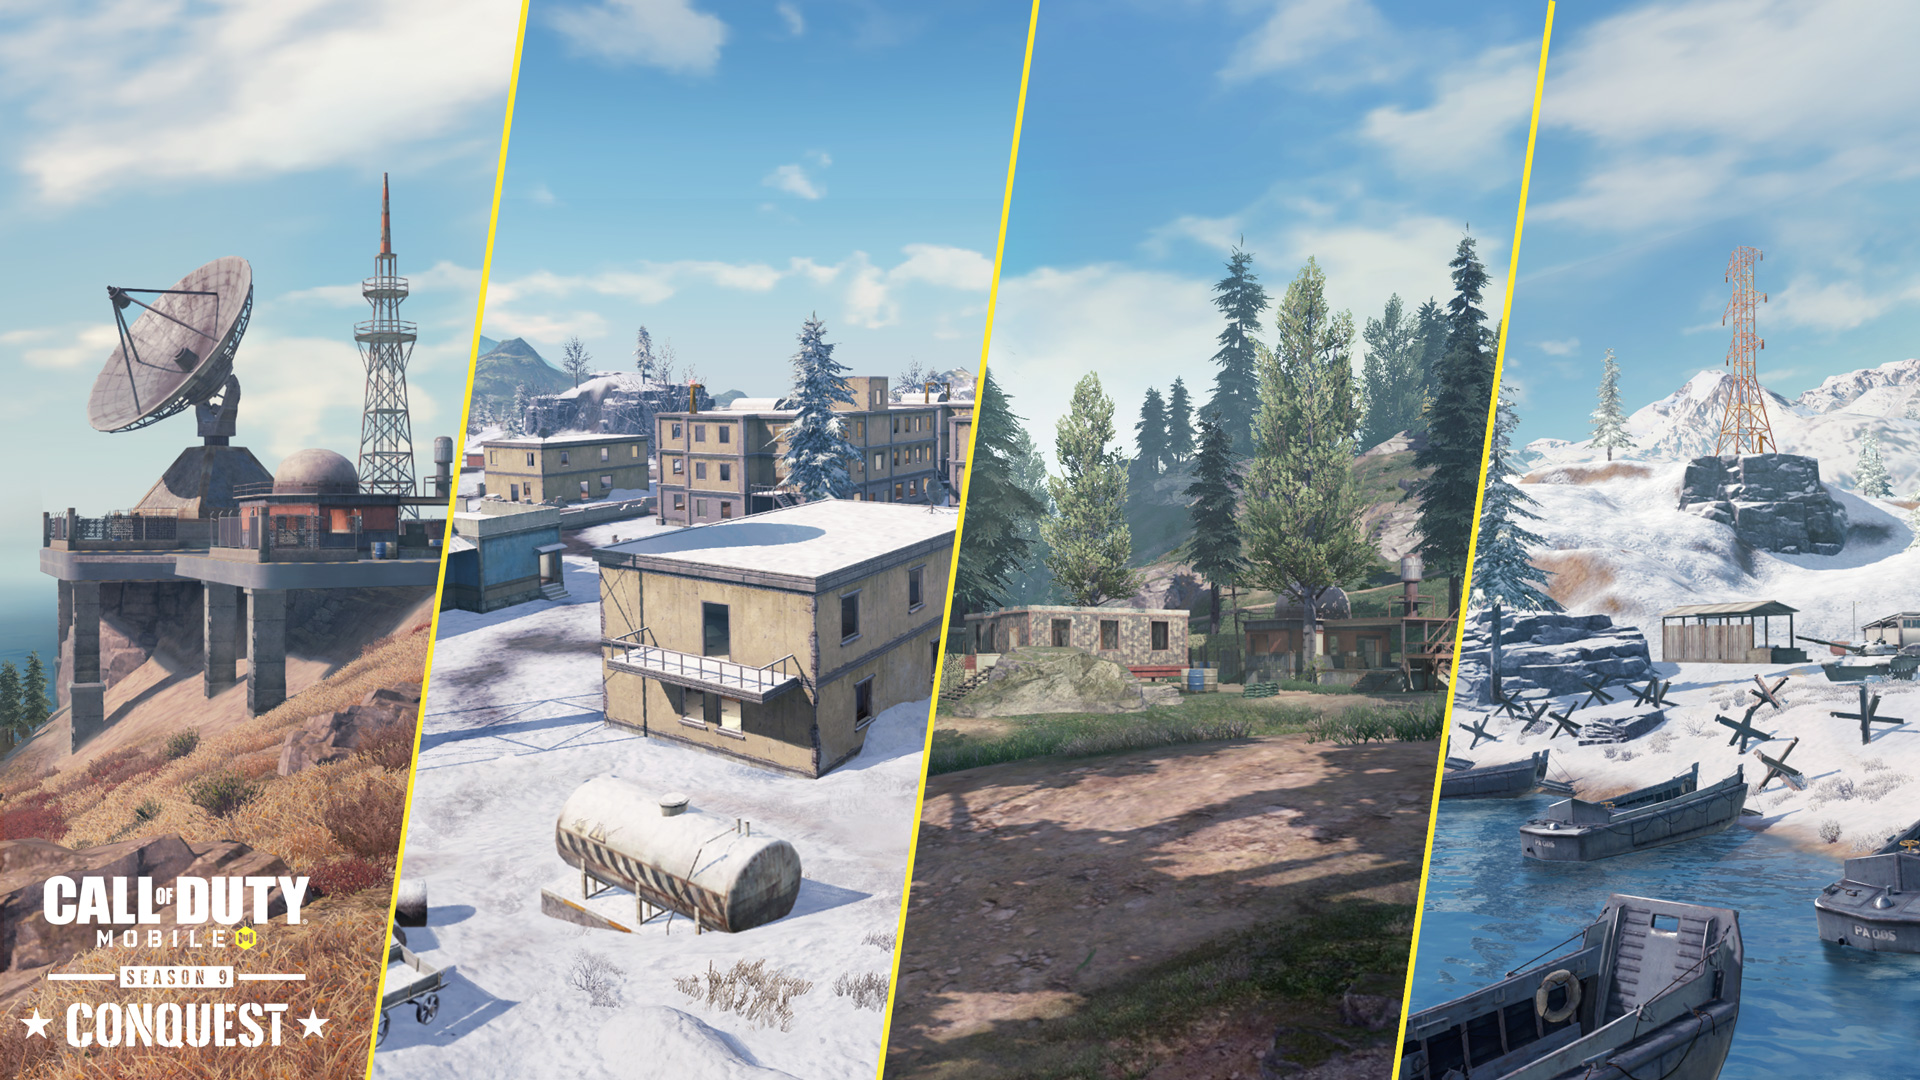 Call of Duty Mobile Season 9 available for download with Shipment 1944 map,  new ranked series, and lots more